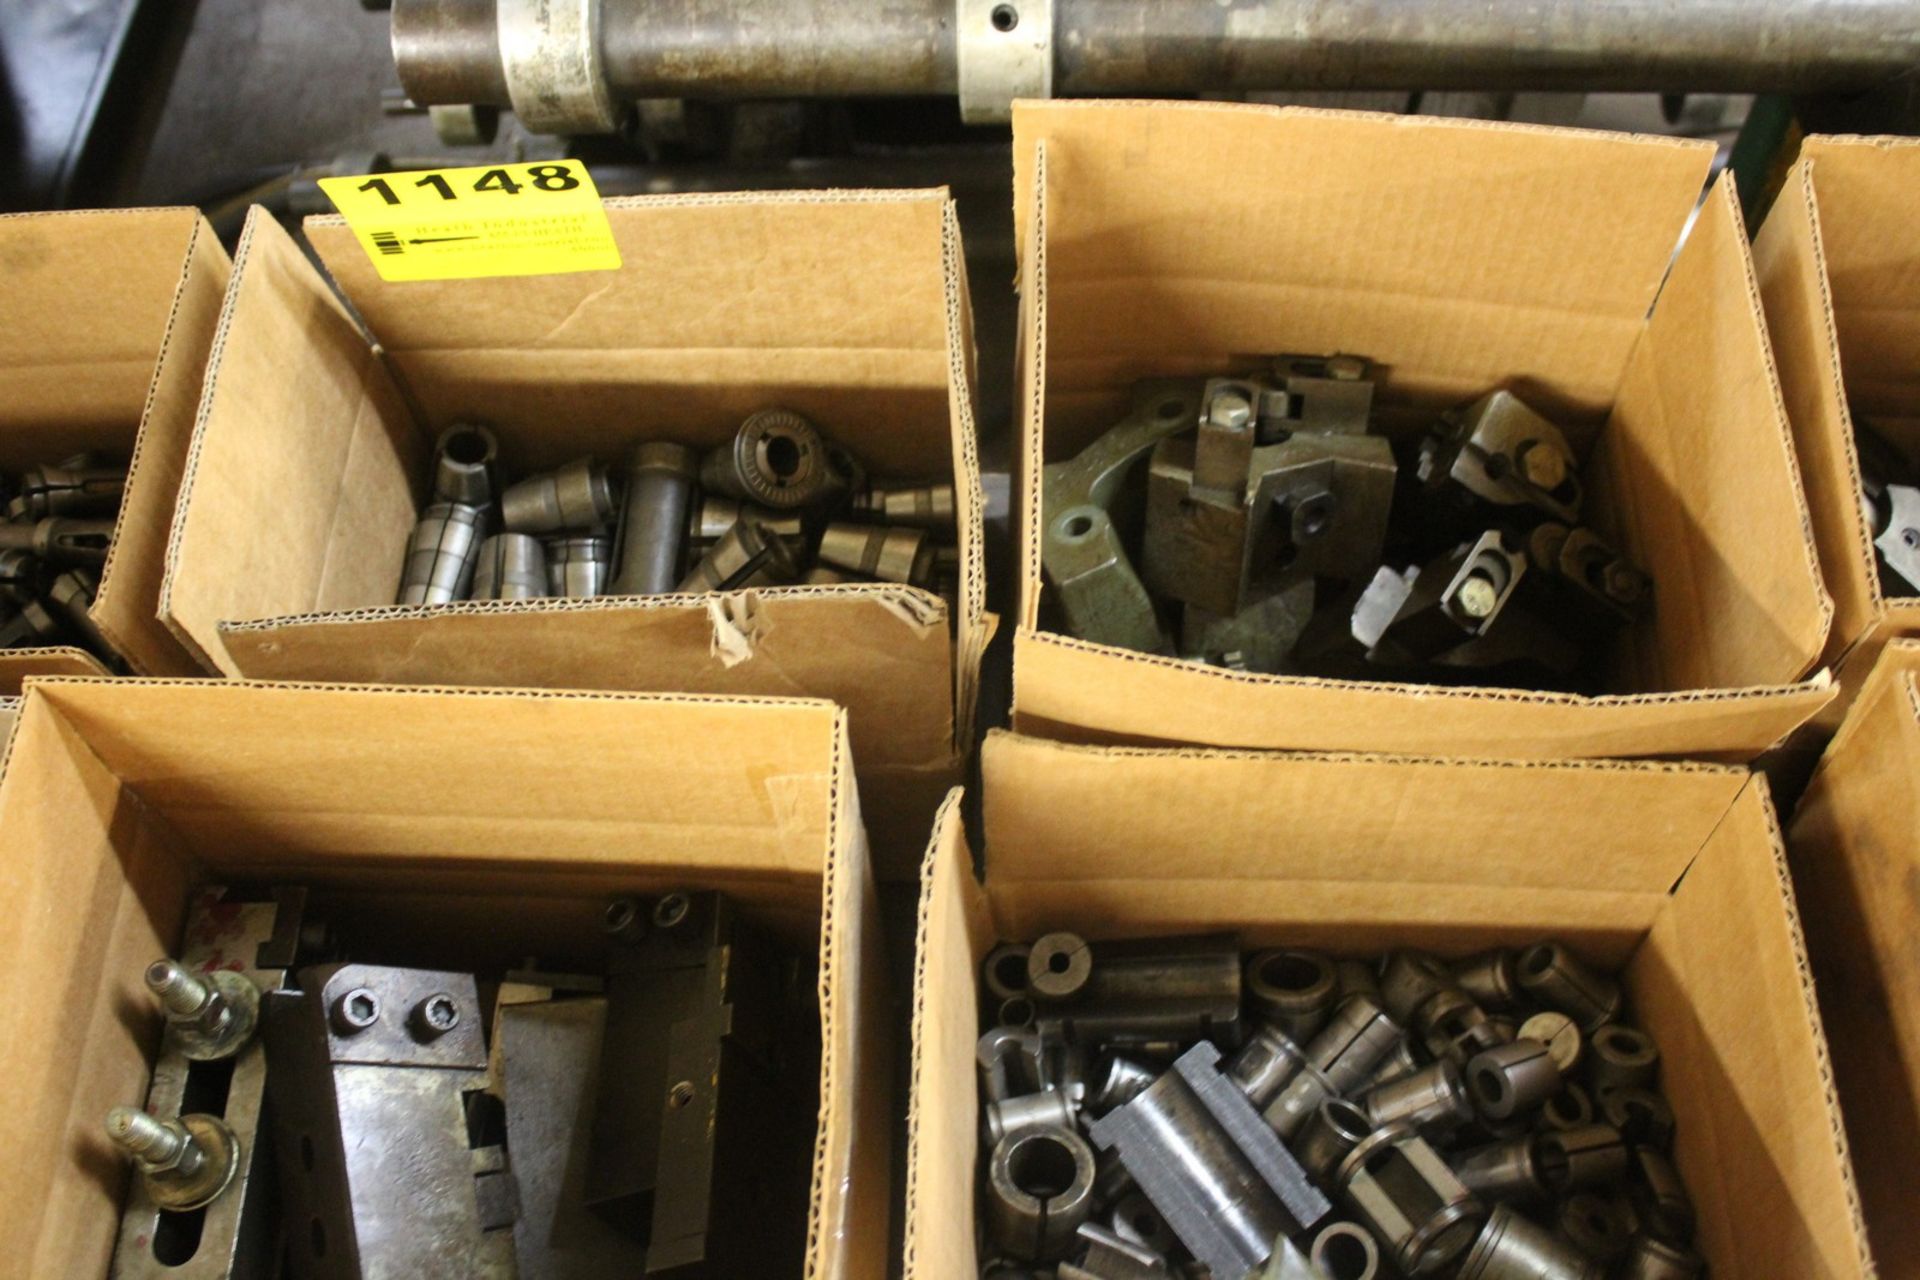 (4) BOXES OF MACHINE PARTS AND ACCESSORIES